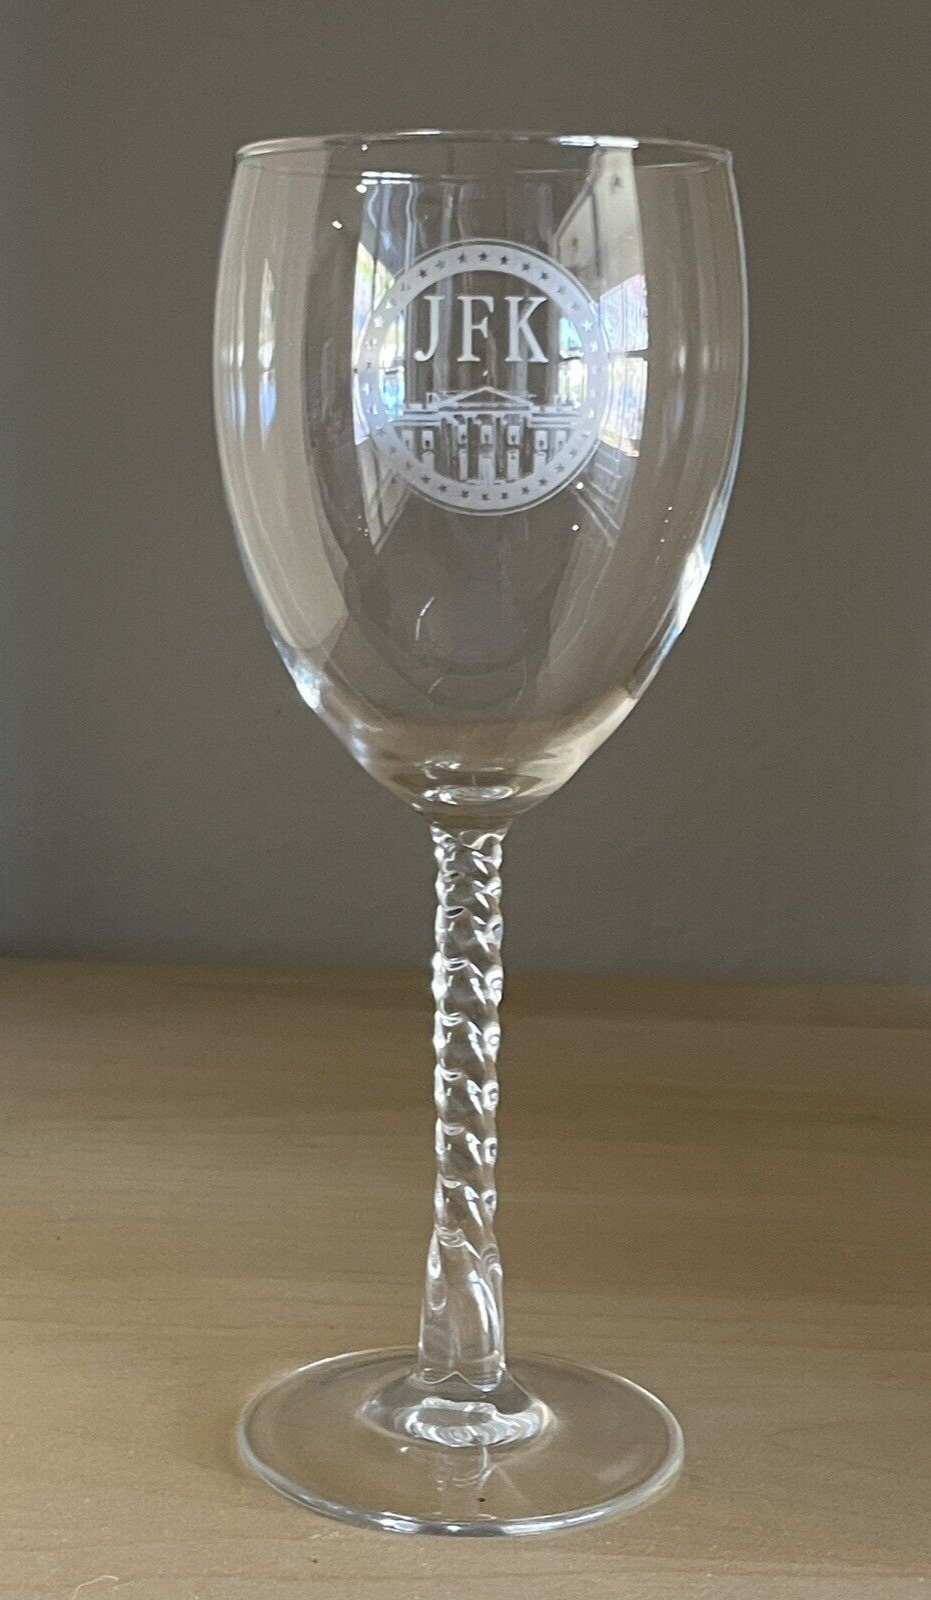 John F Kennedy souvenir wine glass from The Exhibition in St Petersburg FL